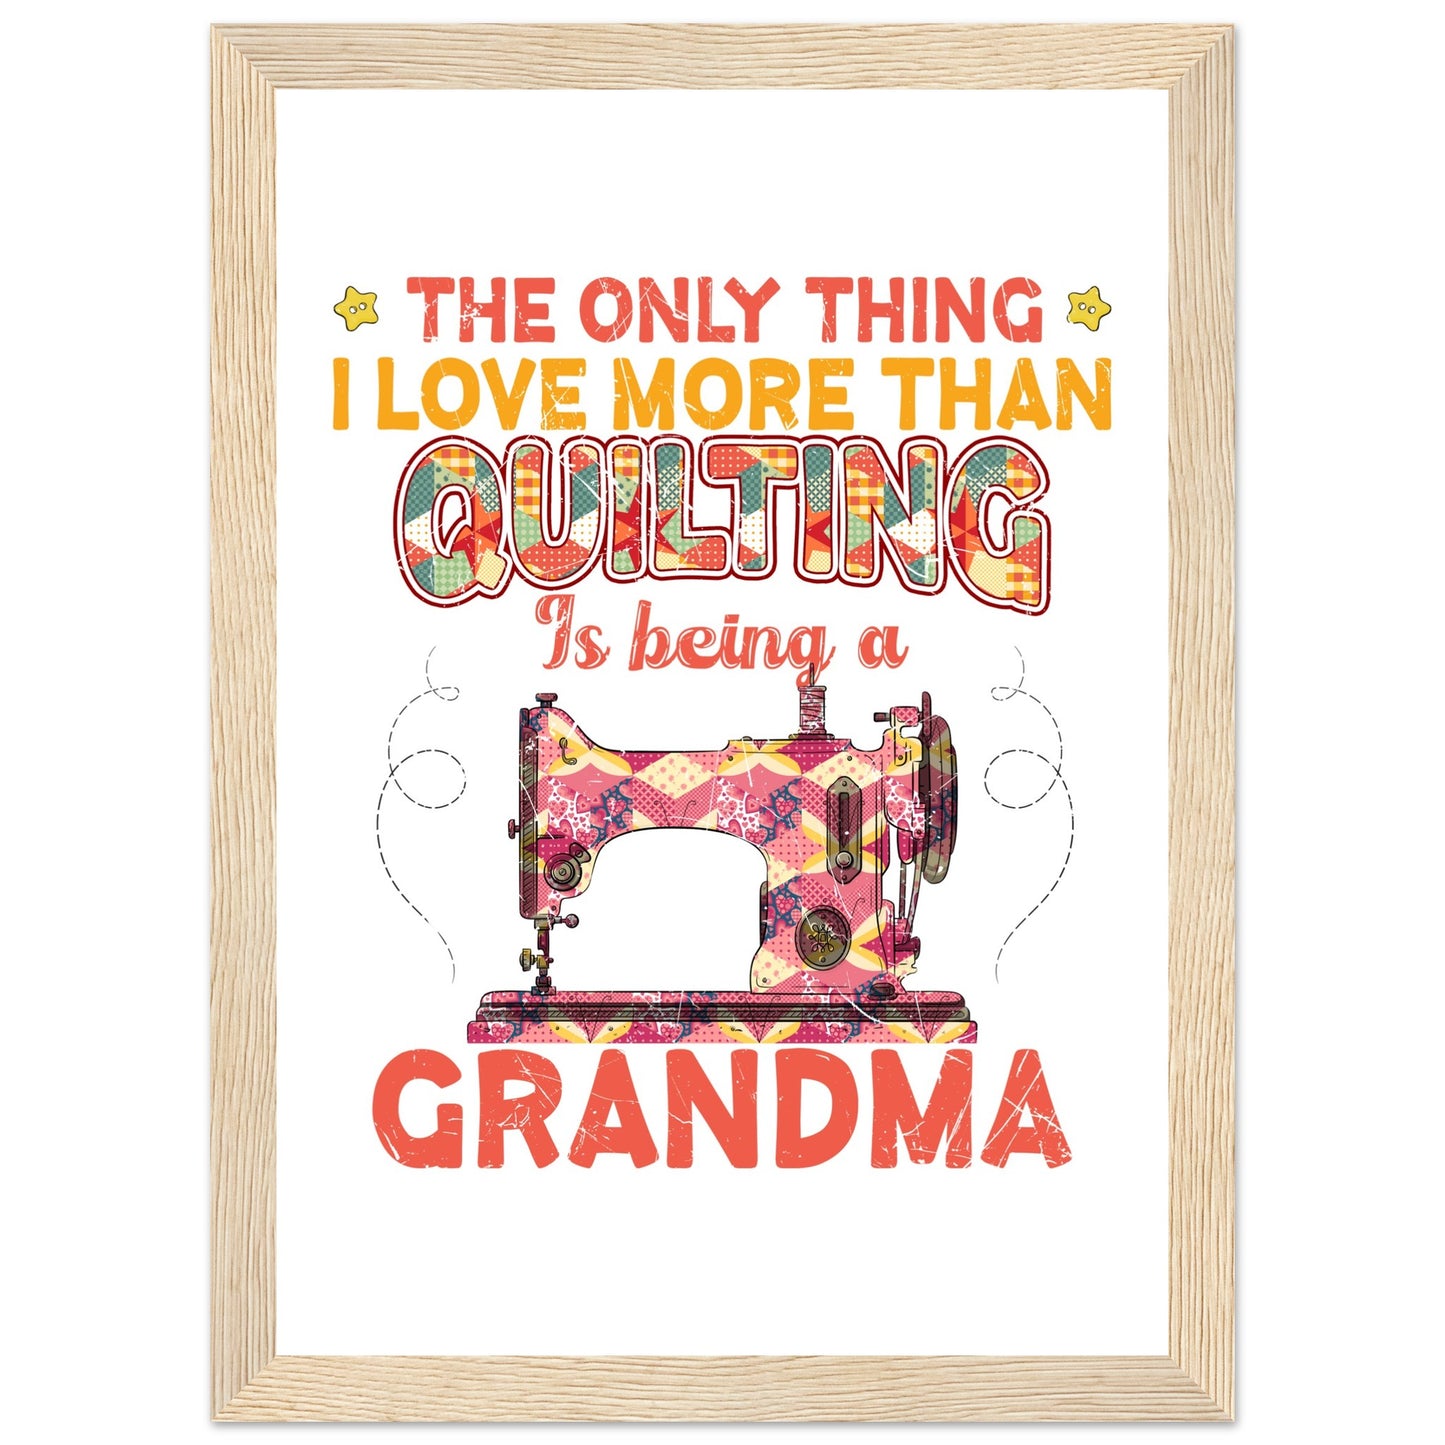 The Only Thing I Love More Than Quilting is Being a Grandma - Quilting Wall Art - Premium Matte Paper Wooden Framed Poster